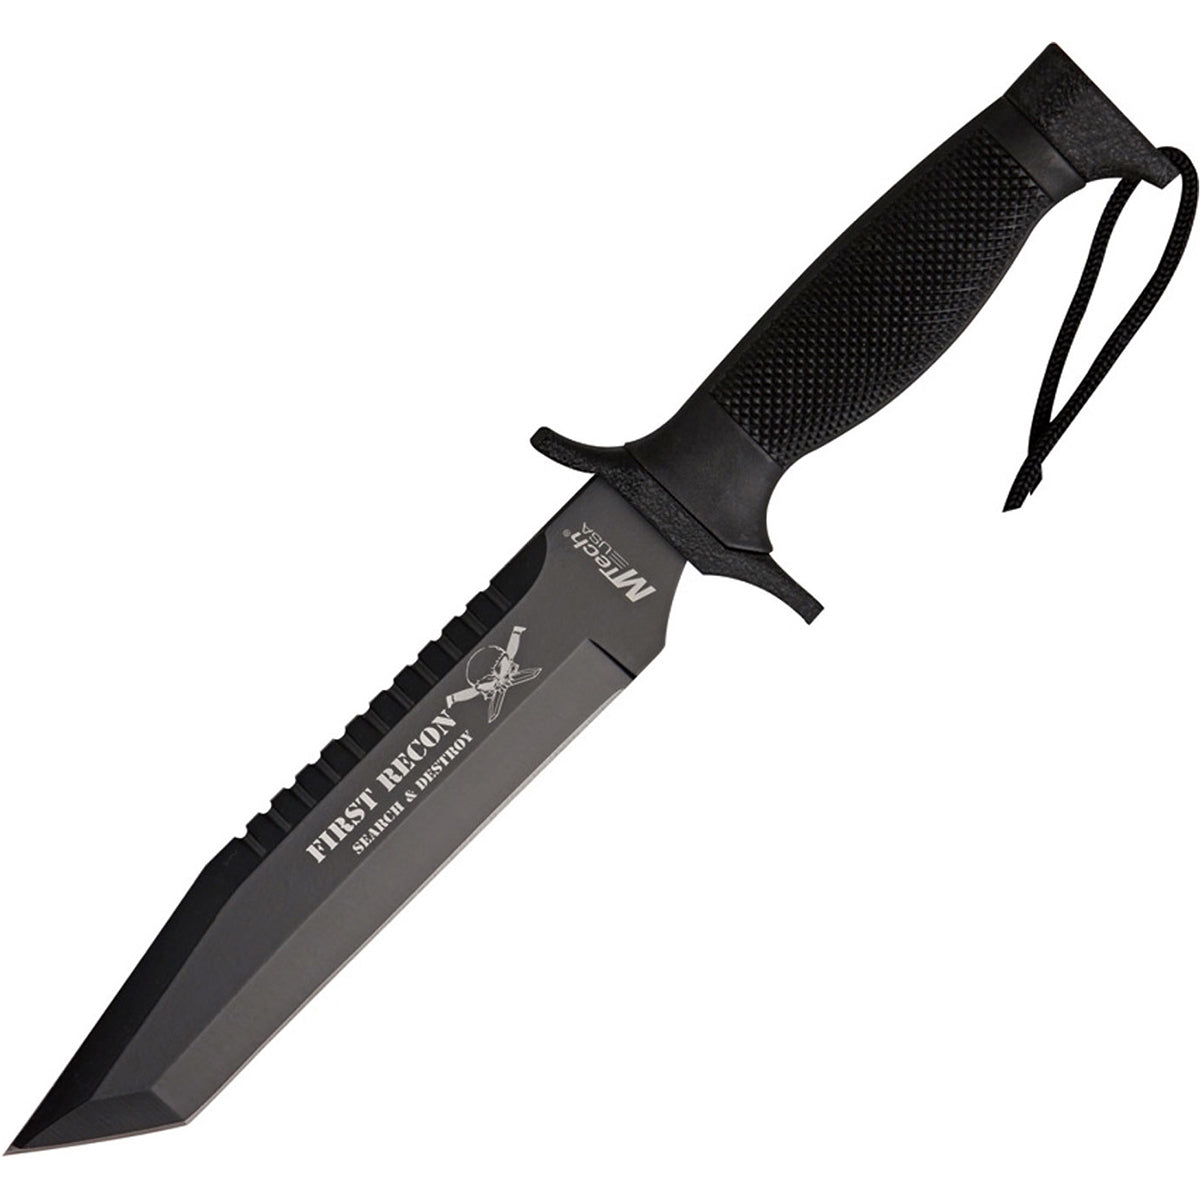 MTech USA First Recon Tactical Tanto Fixed Blade Survival Knife, Black, MT-676TB M-Tech